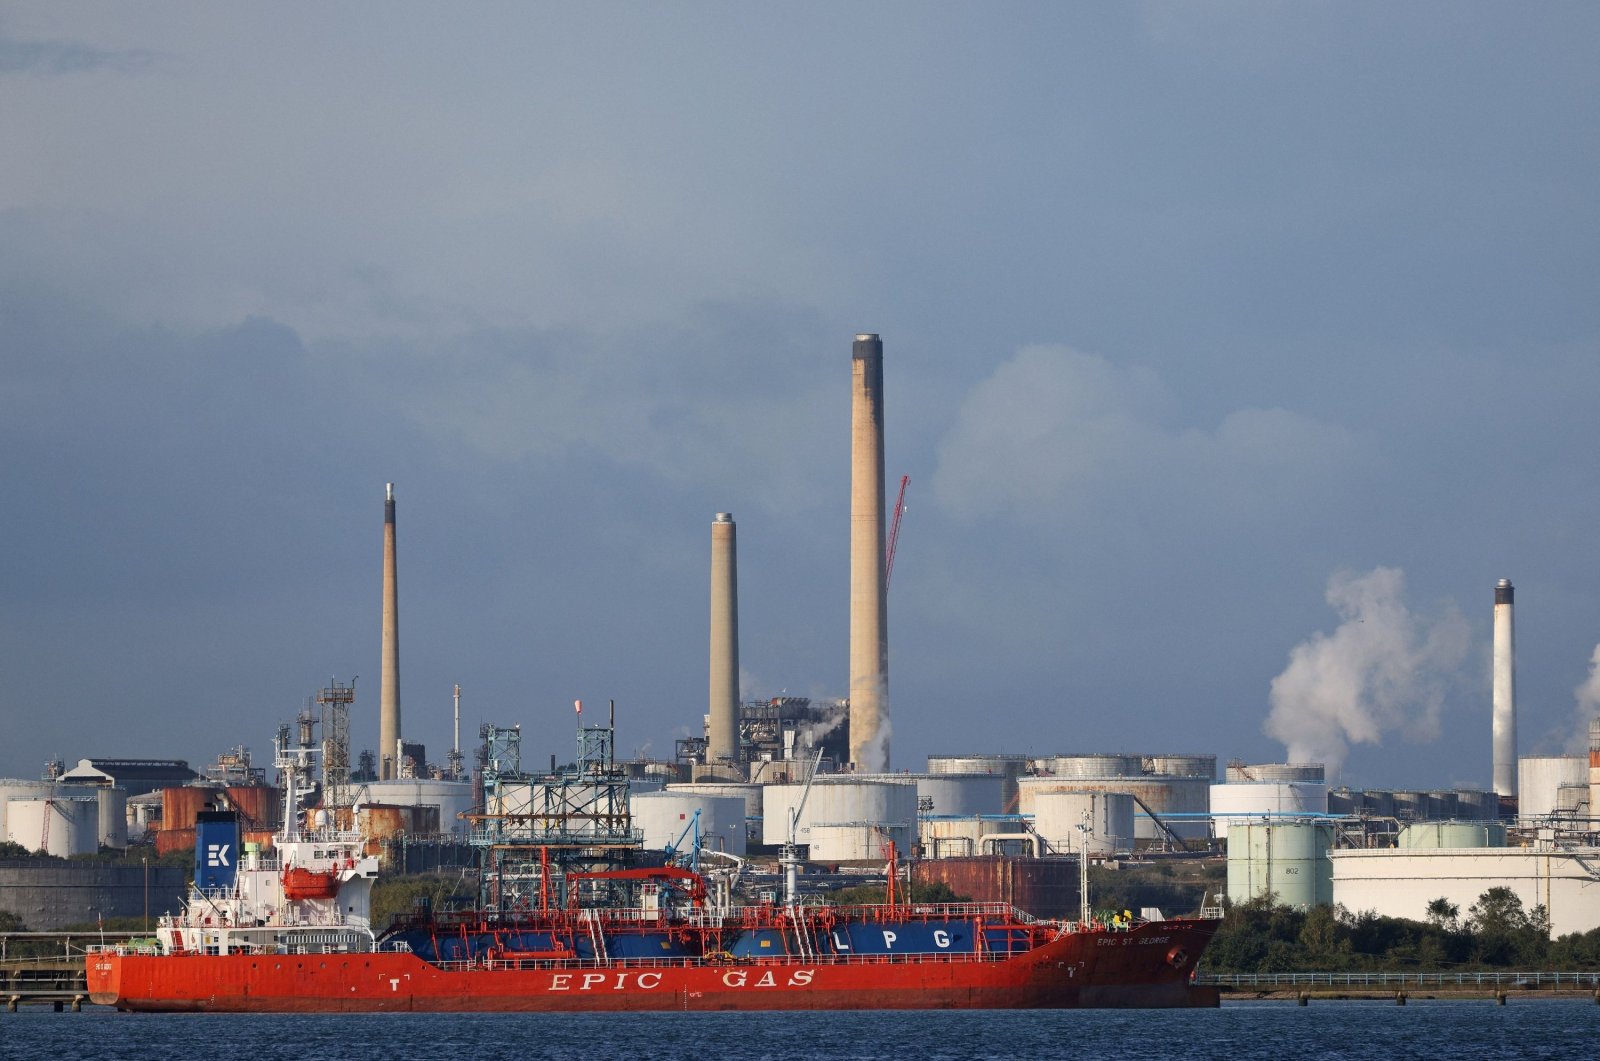 The MV Epic St George LNG (liquid natural gas tanker) passes the Esso Oil refinery in Fawley, near Southampton, southern England, Oct. 4, 2021. (AFP Photo)